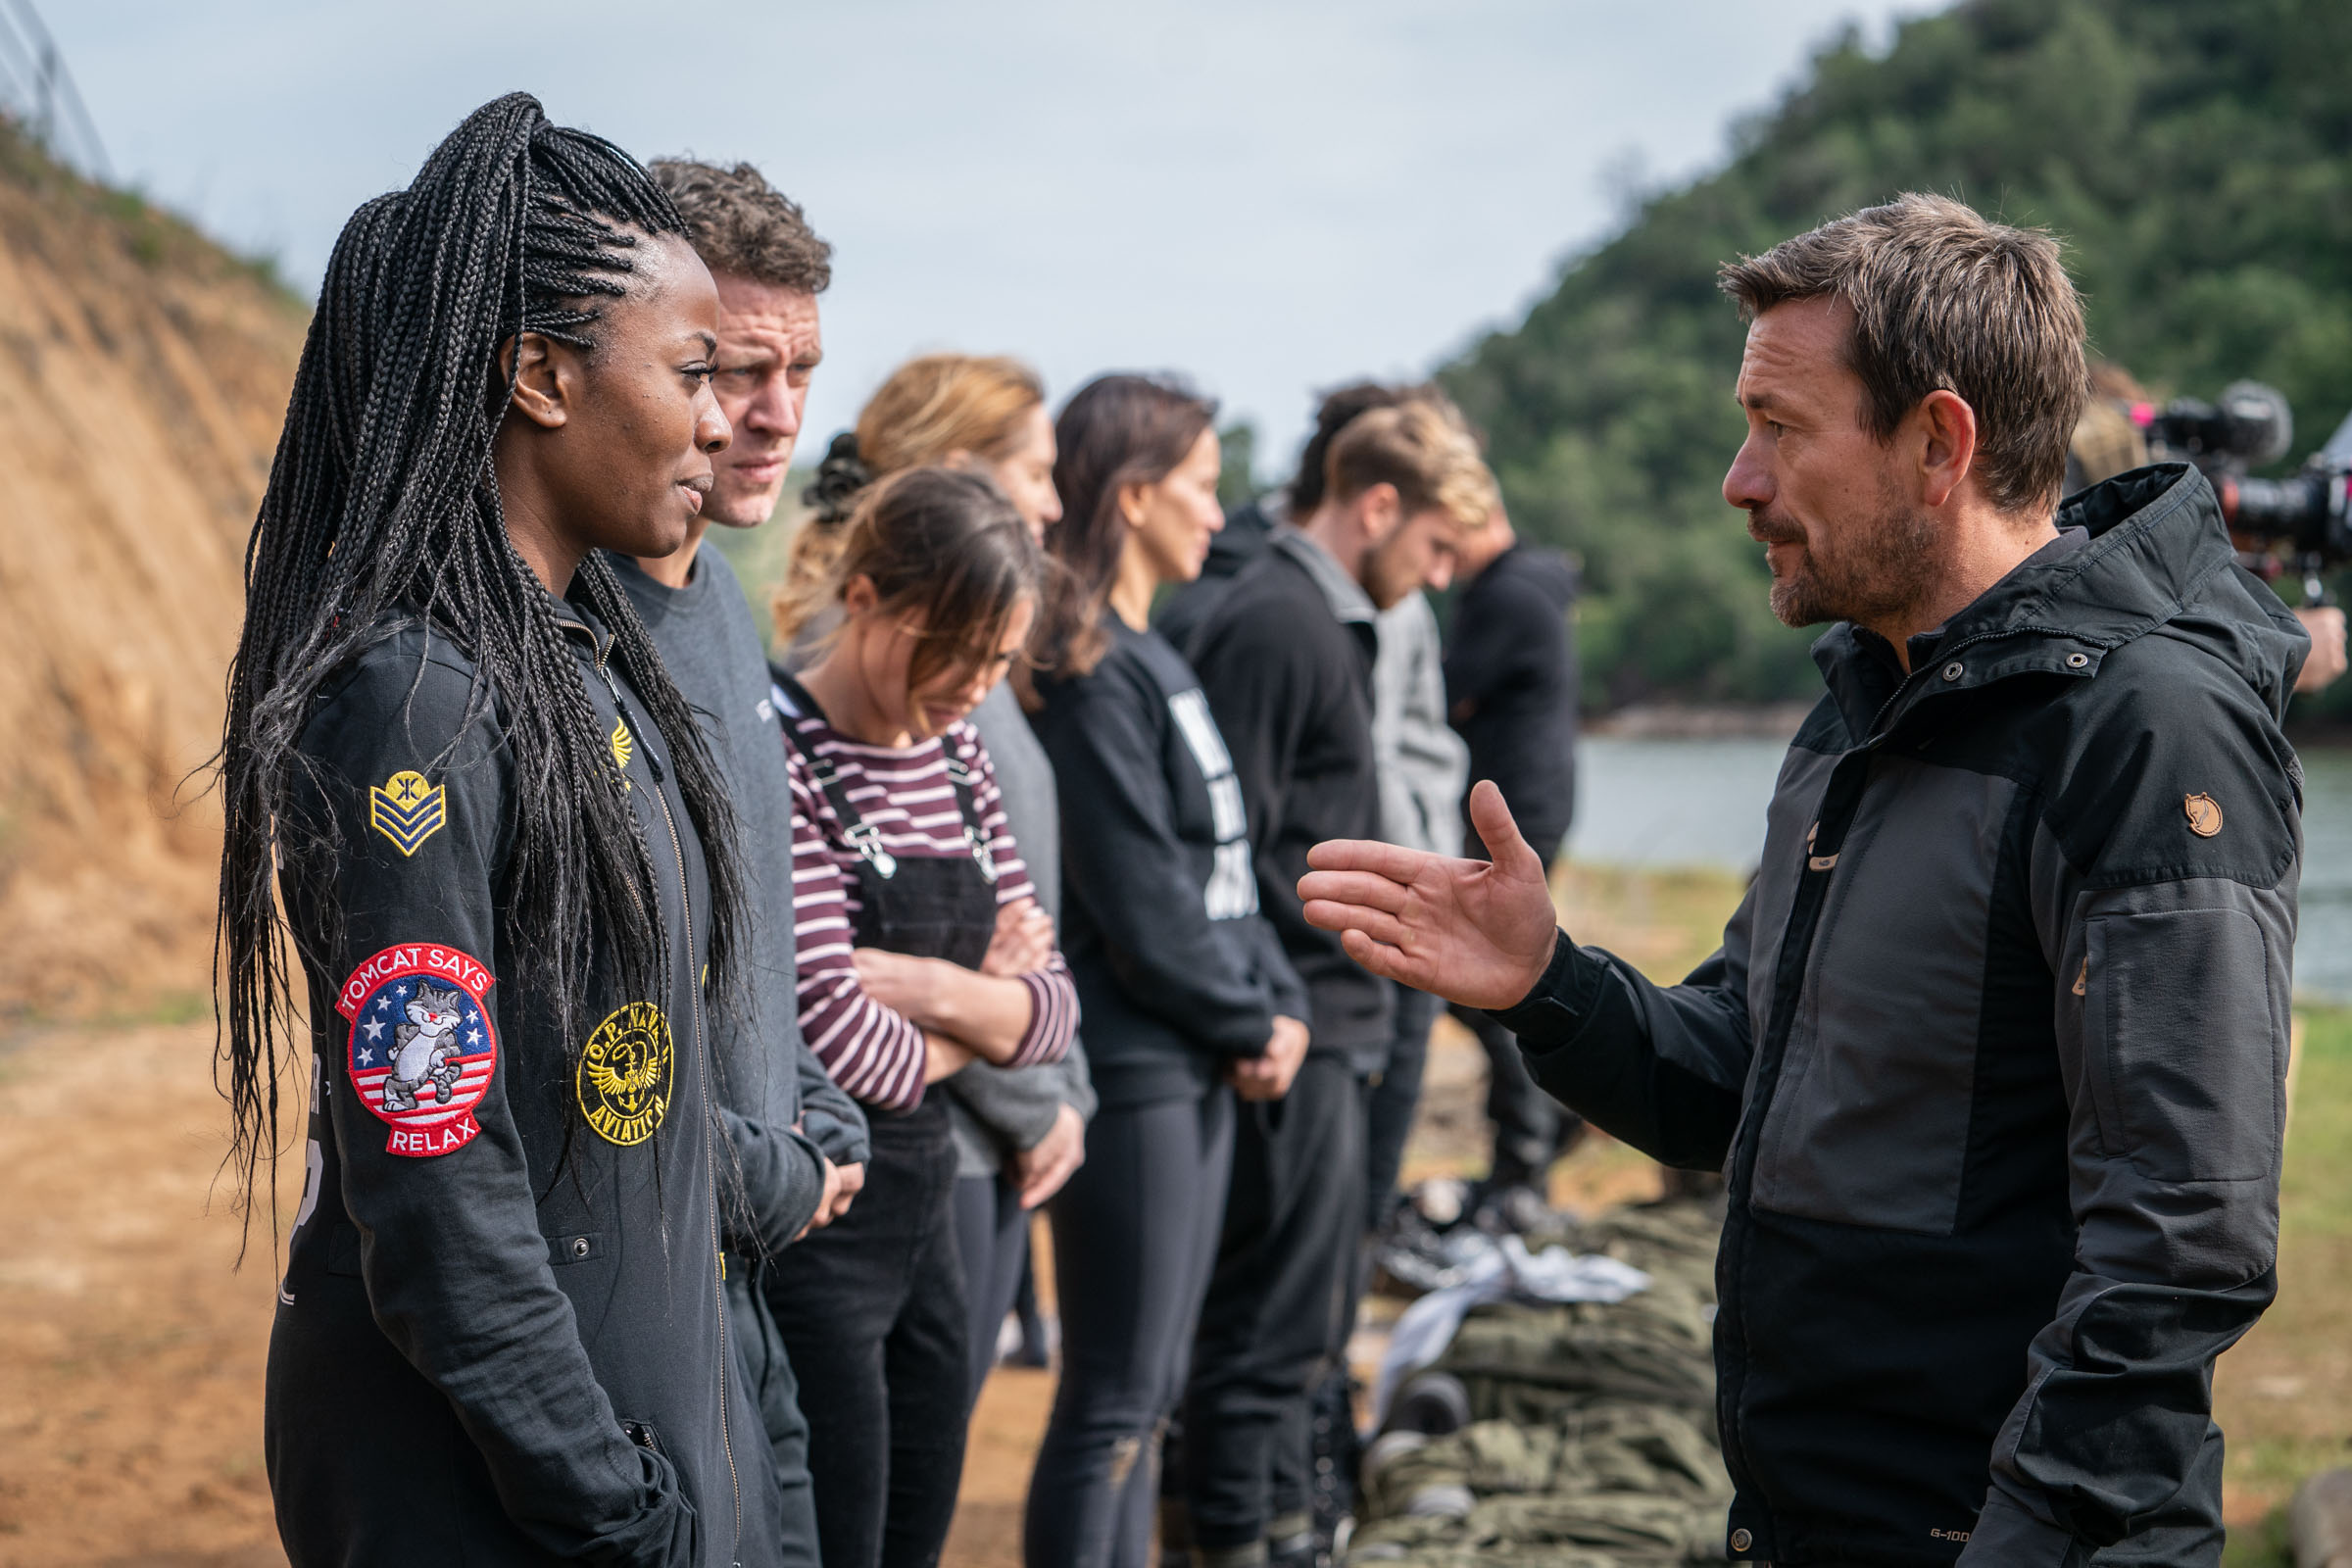  DS Ollie Ollerton instructs the recruits before the backwards dive  Episode 1 - Courage  Minnow Films / Channel 4 